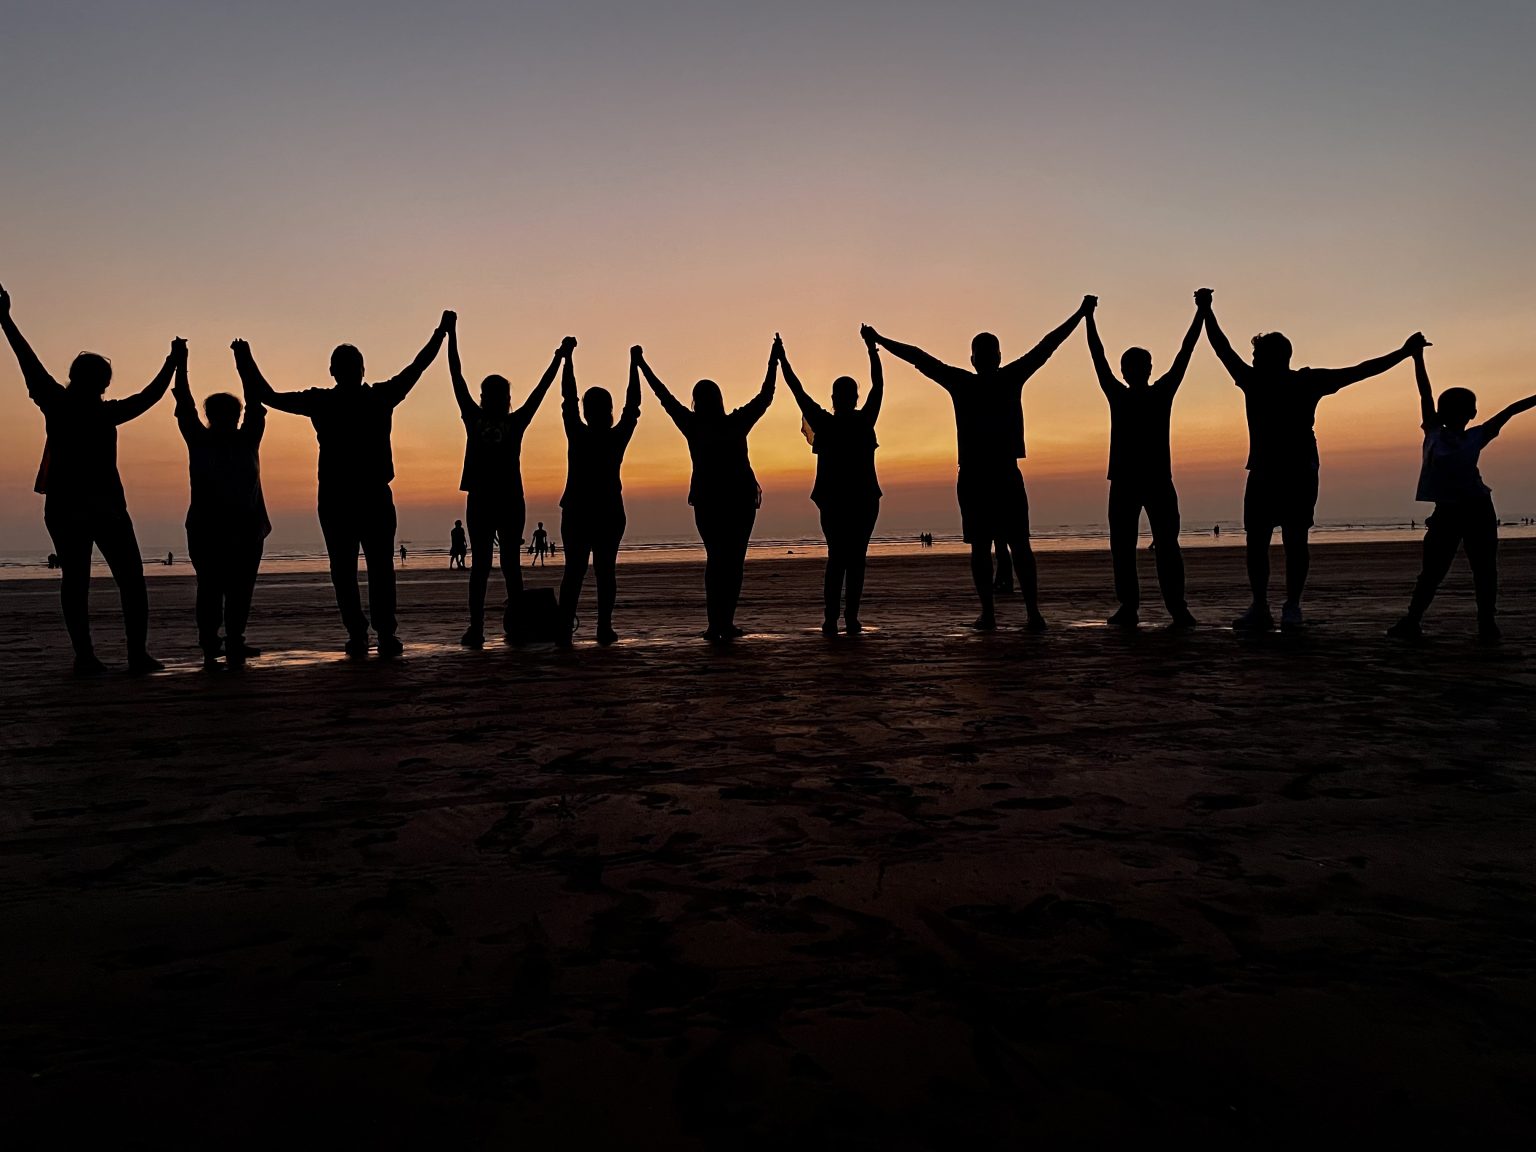 10 people in a line holding hands on a beach.